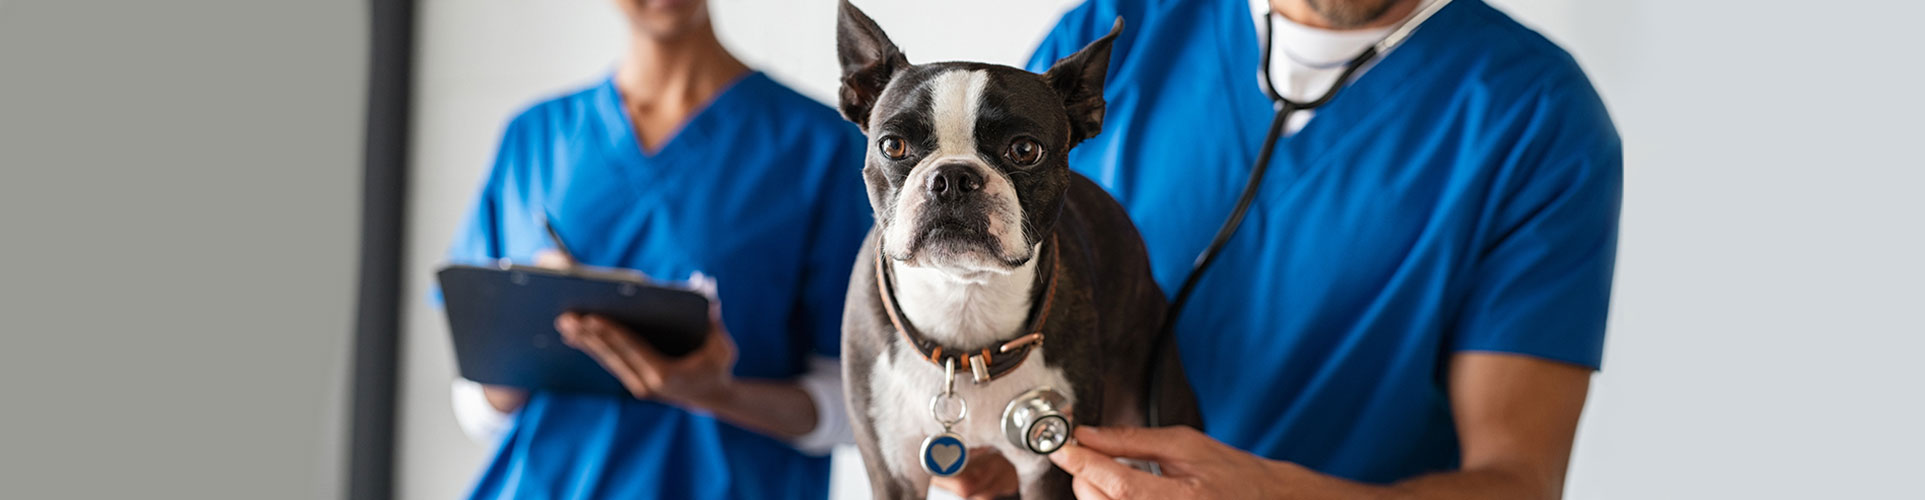 Man vet examining boston terrier with stethoscope in clinic. Veterinarian doctor making checkup of a dog. Young man vet examining dog by stethoscope at pet clinic while nurse making notes in background.